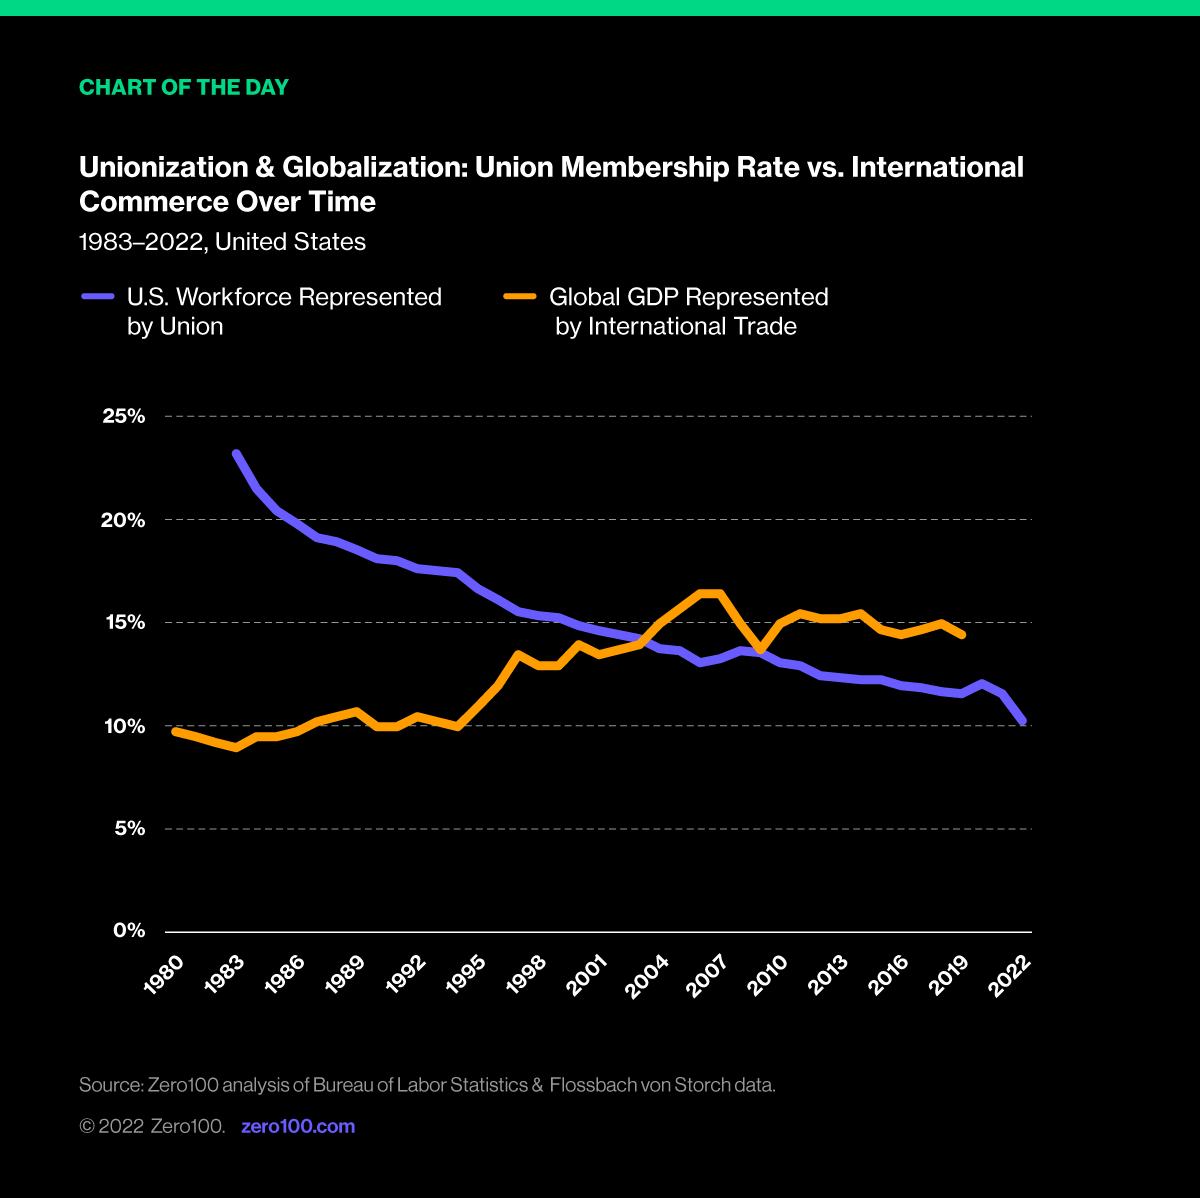 Graph depicting the unionization & globalization: union membership rate vs. international commerce over time. Source: Zero100 analysis of Bureau of Labor Statistics & Flossbach von Storch data.